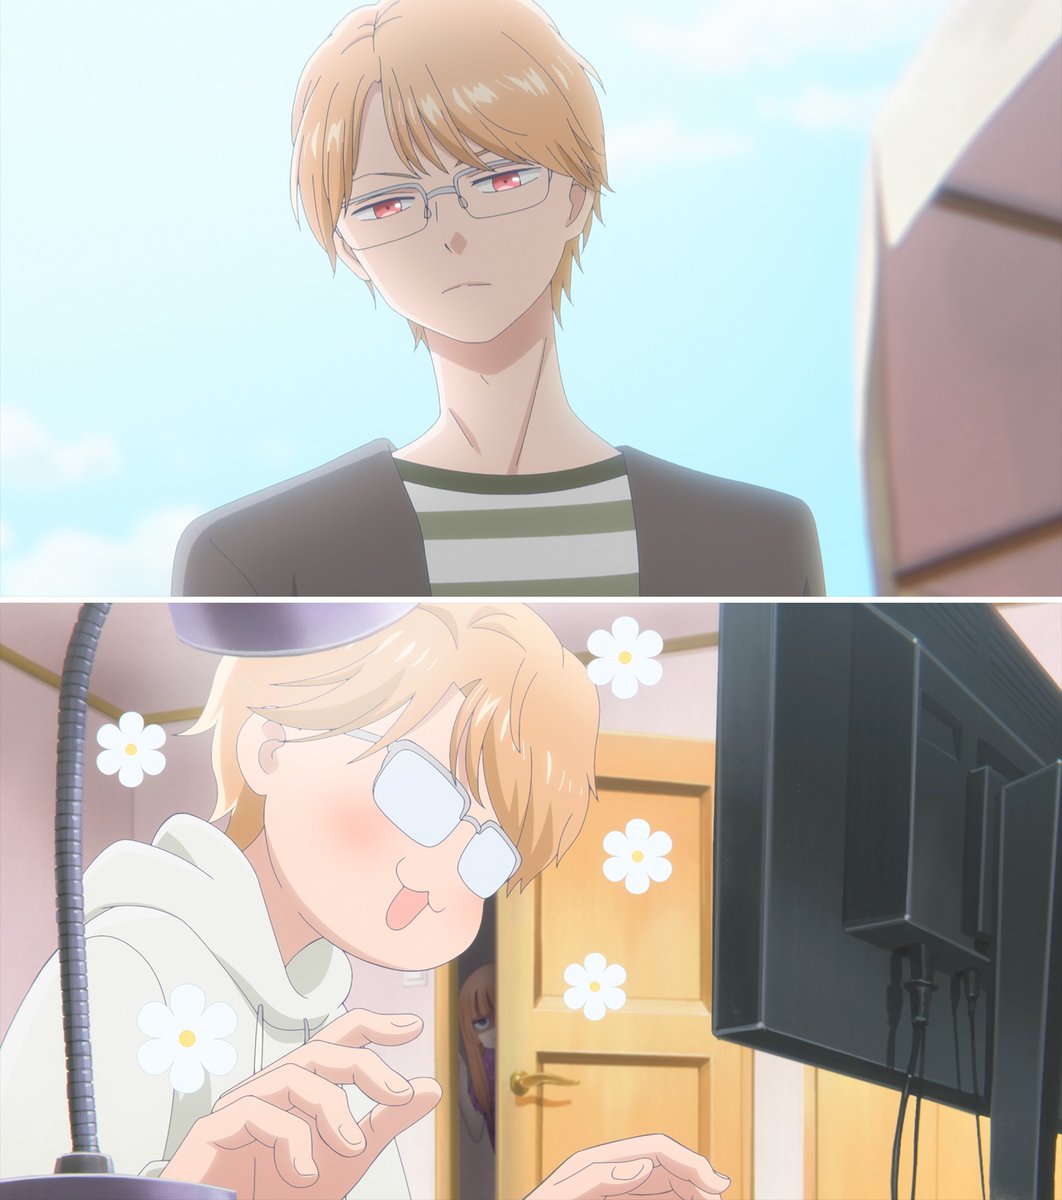 Crunchyroll Adds My Love Story with Yamada-kun at Lv999, My Home